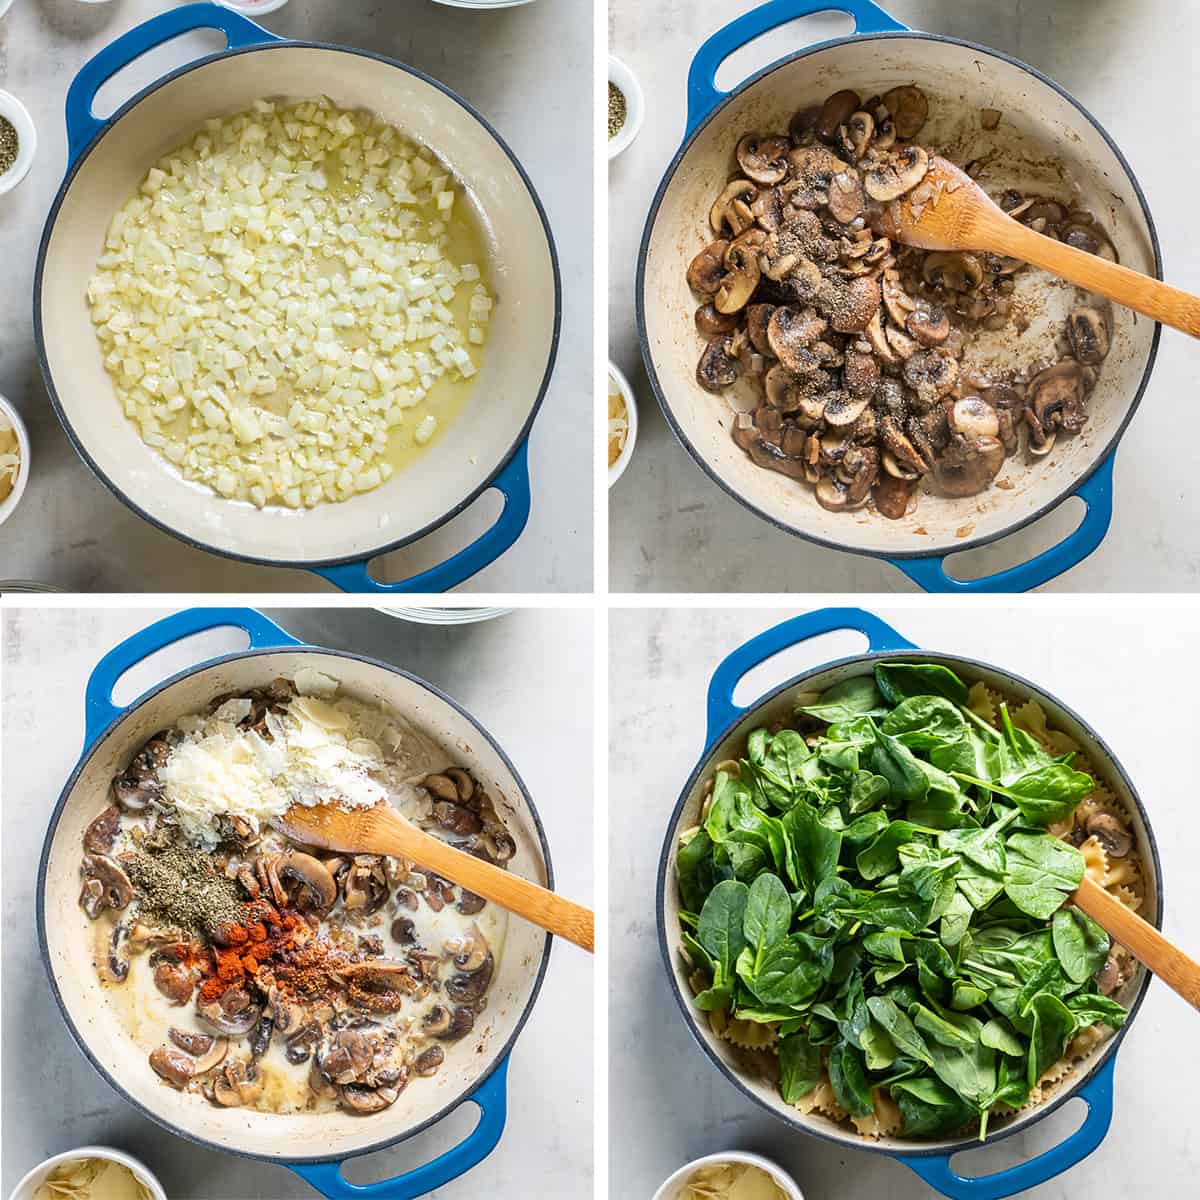 Four images showing pasta with mushroom and spinach being prepared in skillet.